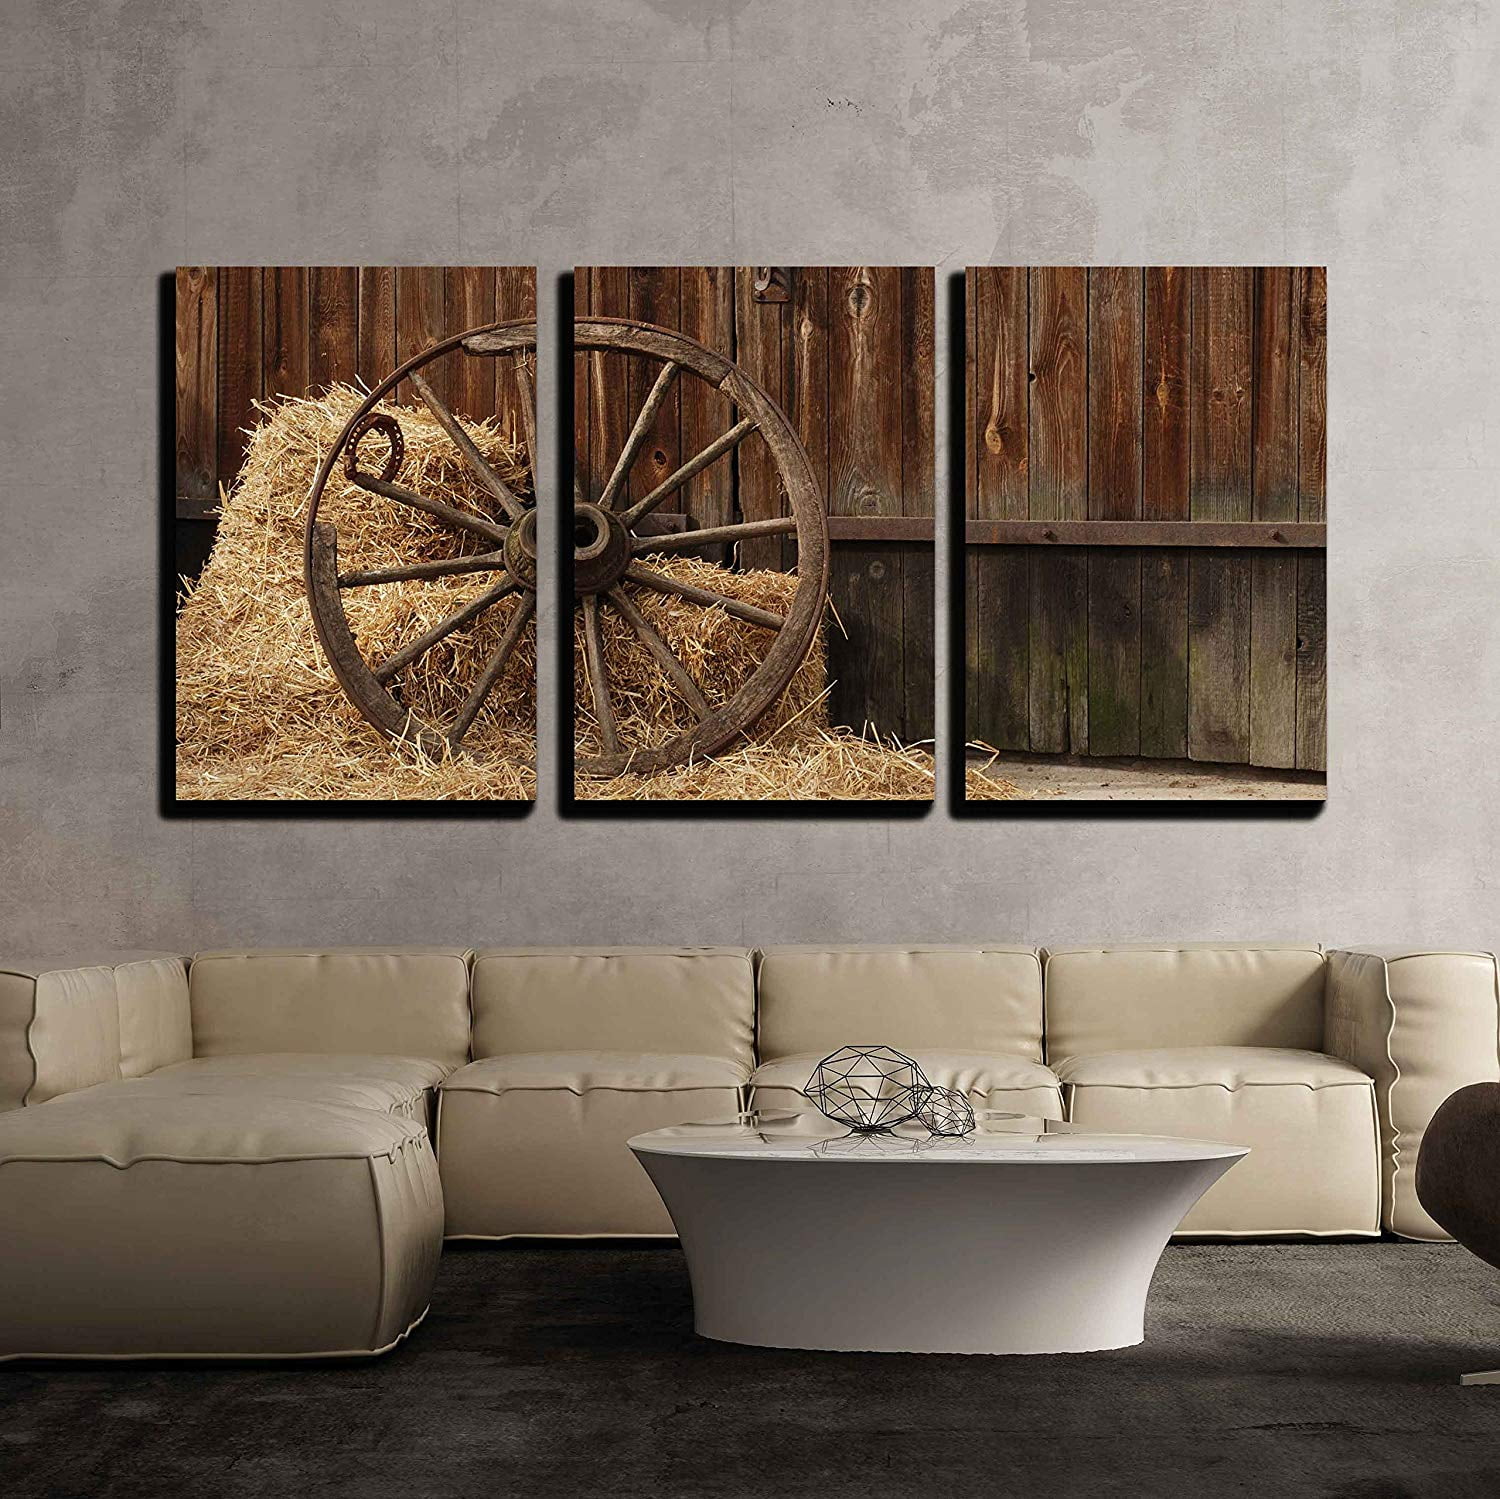 wall26 - 3 Piece Canvas Wall Art - The Old Antique Wheel from cart on ...